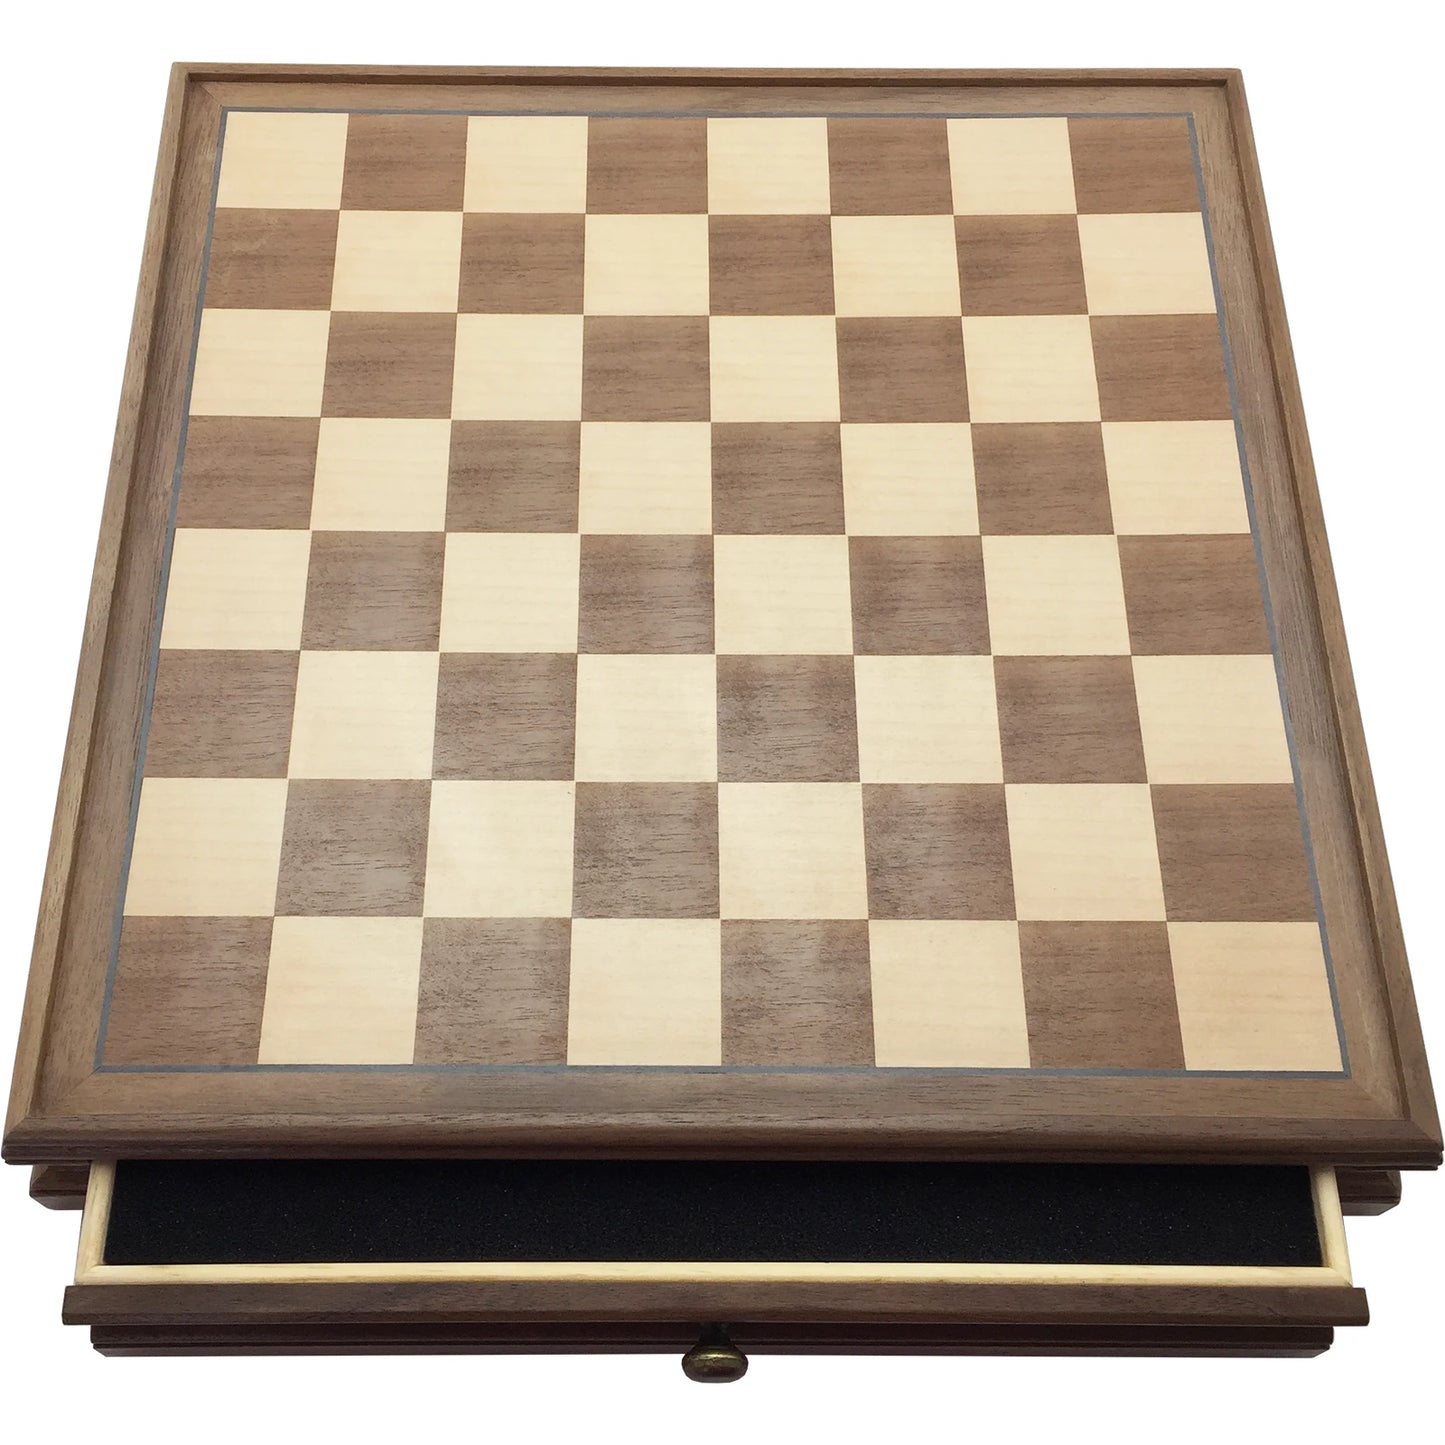 Wood chess board with drawers. Drawer open.